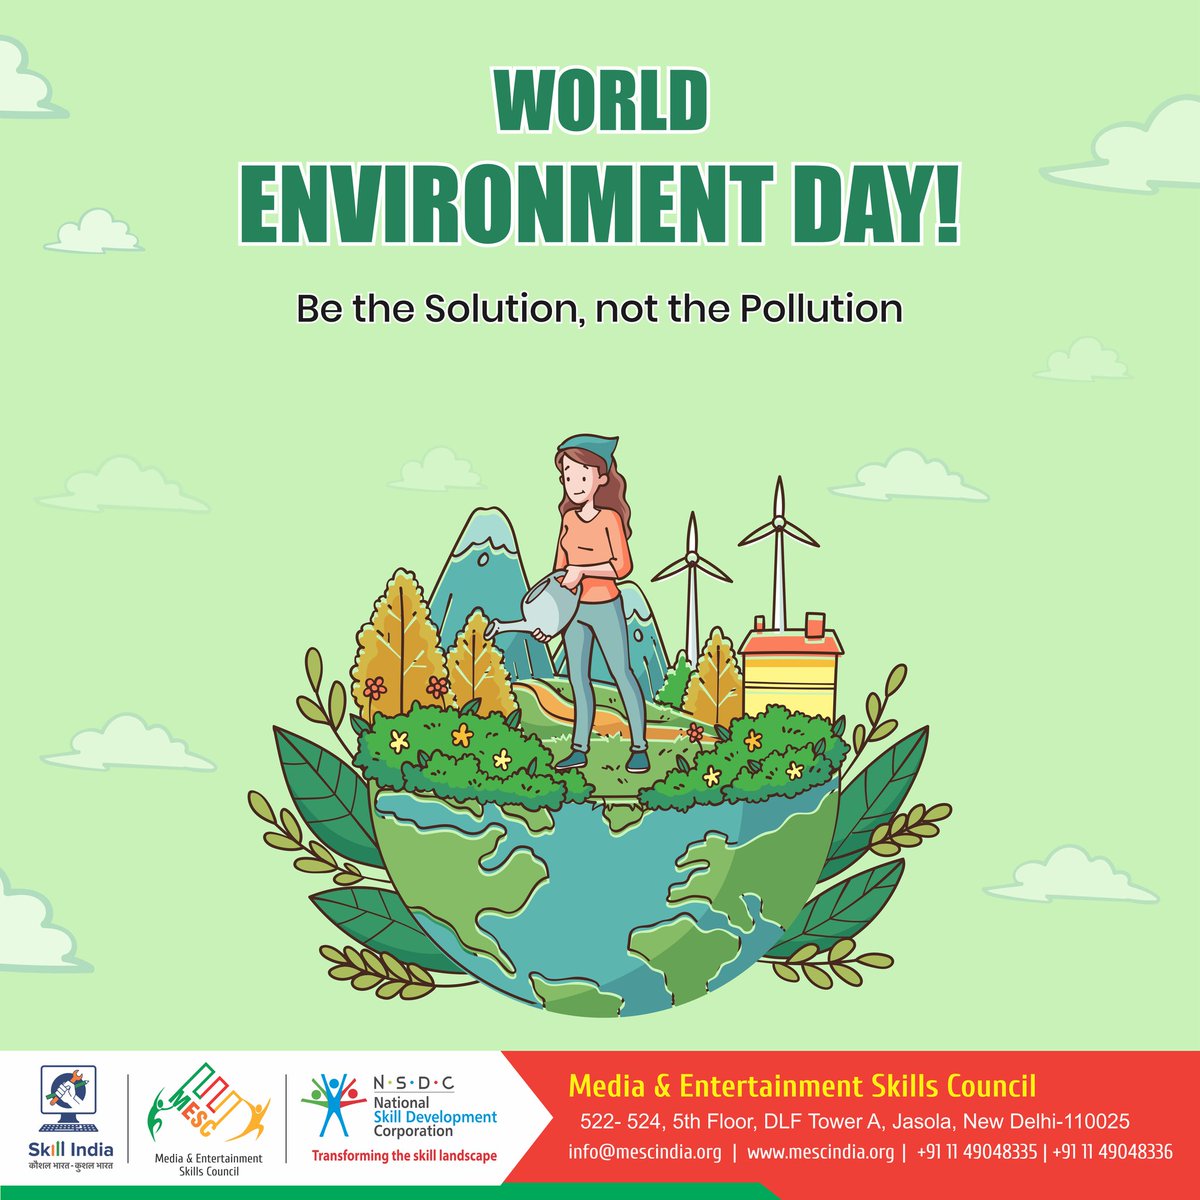 WORLD ENVIRONMENT DAY!   ♻️ 🌱 
.
.
.
.
.
.
#worldenvironmentday #enviornment #enviornmentday2021 #gogreen  #saveearth🌍 #motherearth #ecofriendly